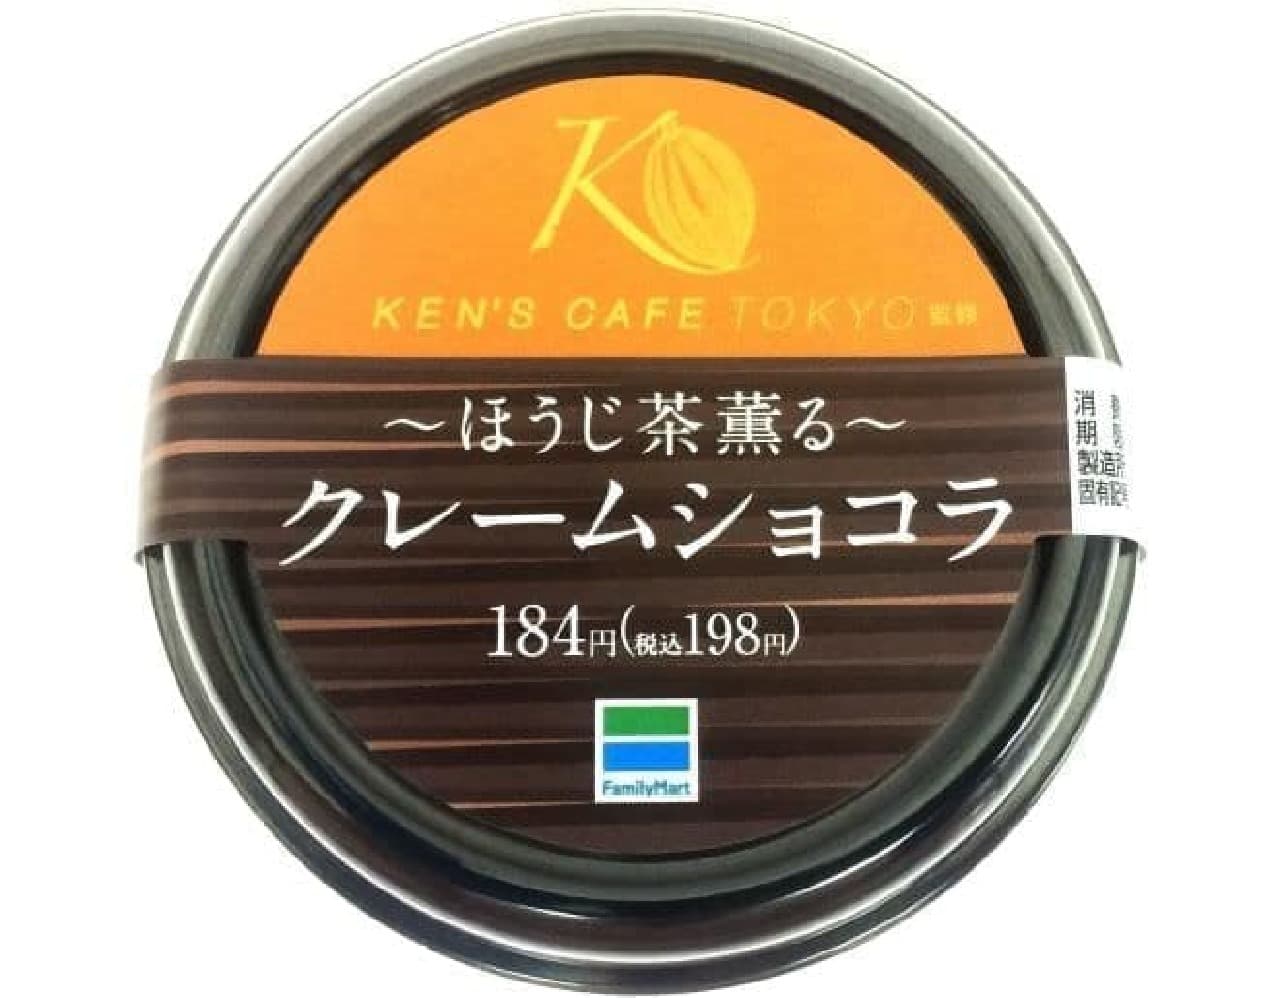 "-Hojicha Kaoru-Claim Chocolat" is a sweet supervised by the chef of Ken's Cafe Tokyo.